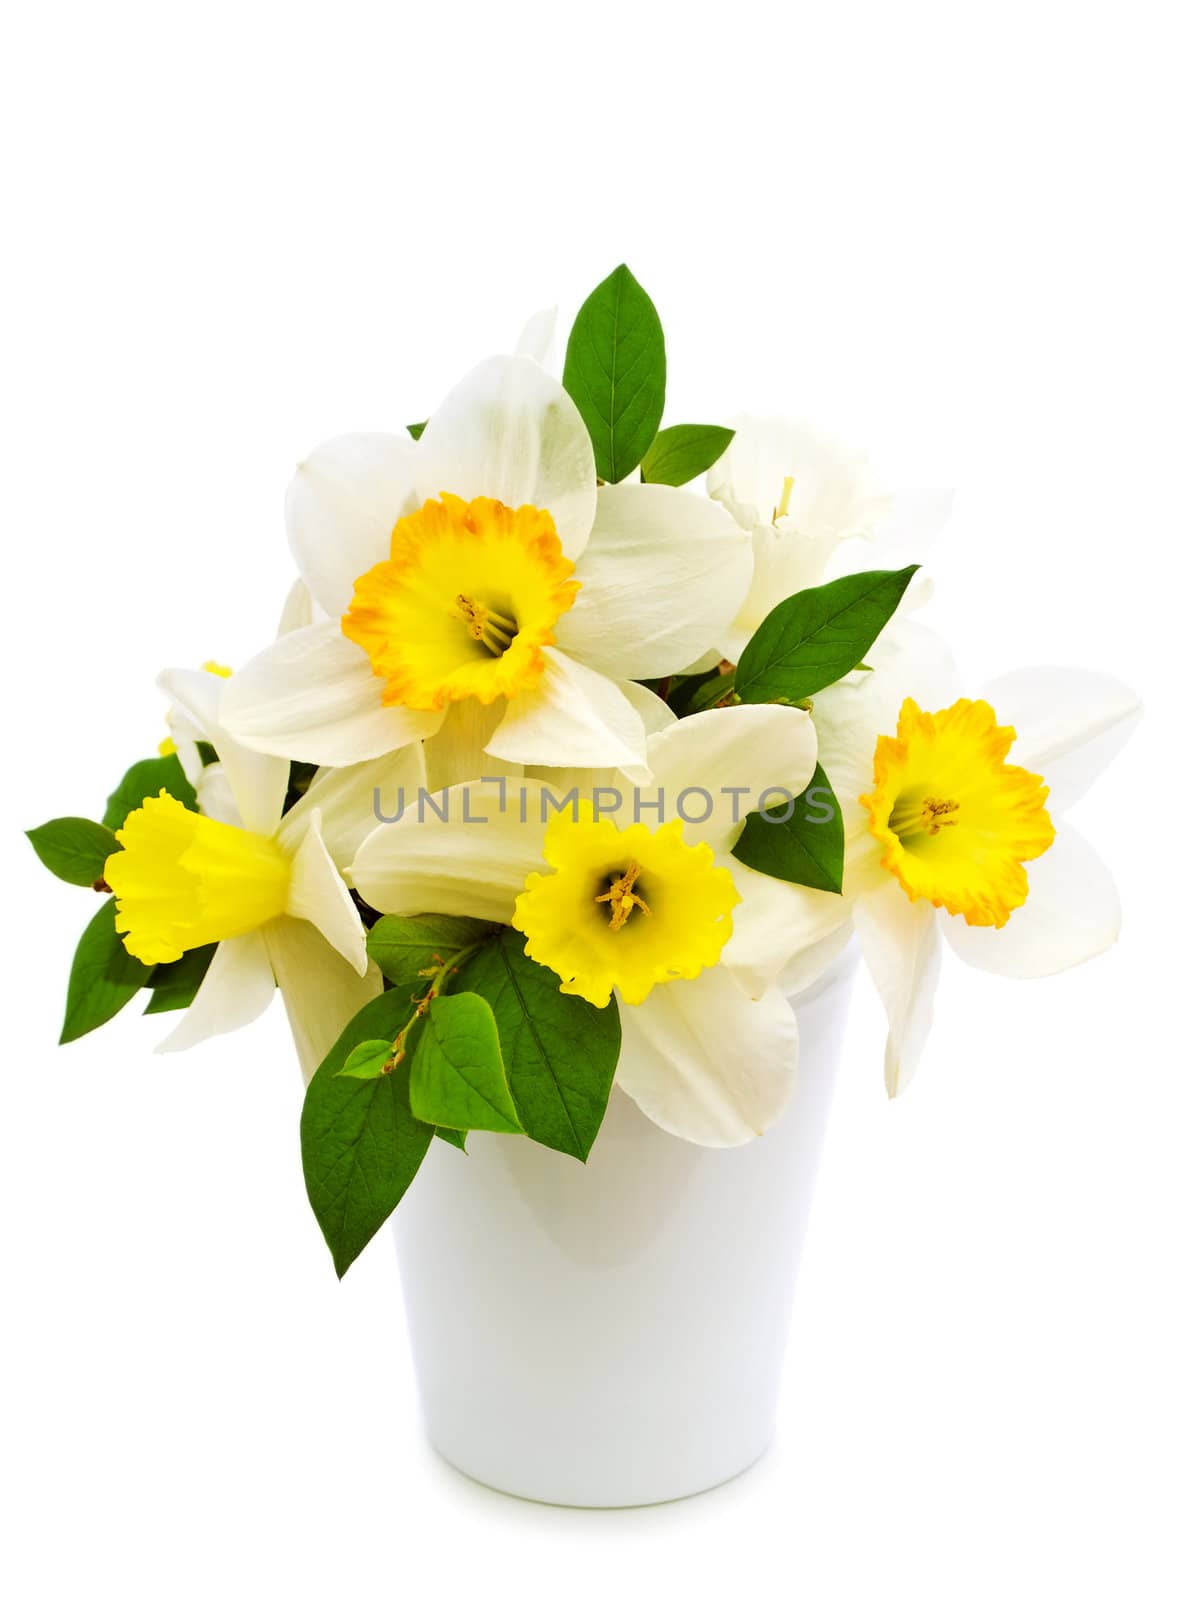 narcissus bouquet over white background